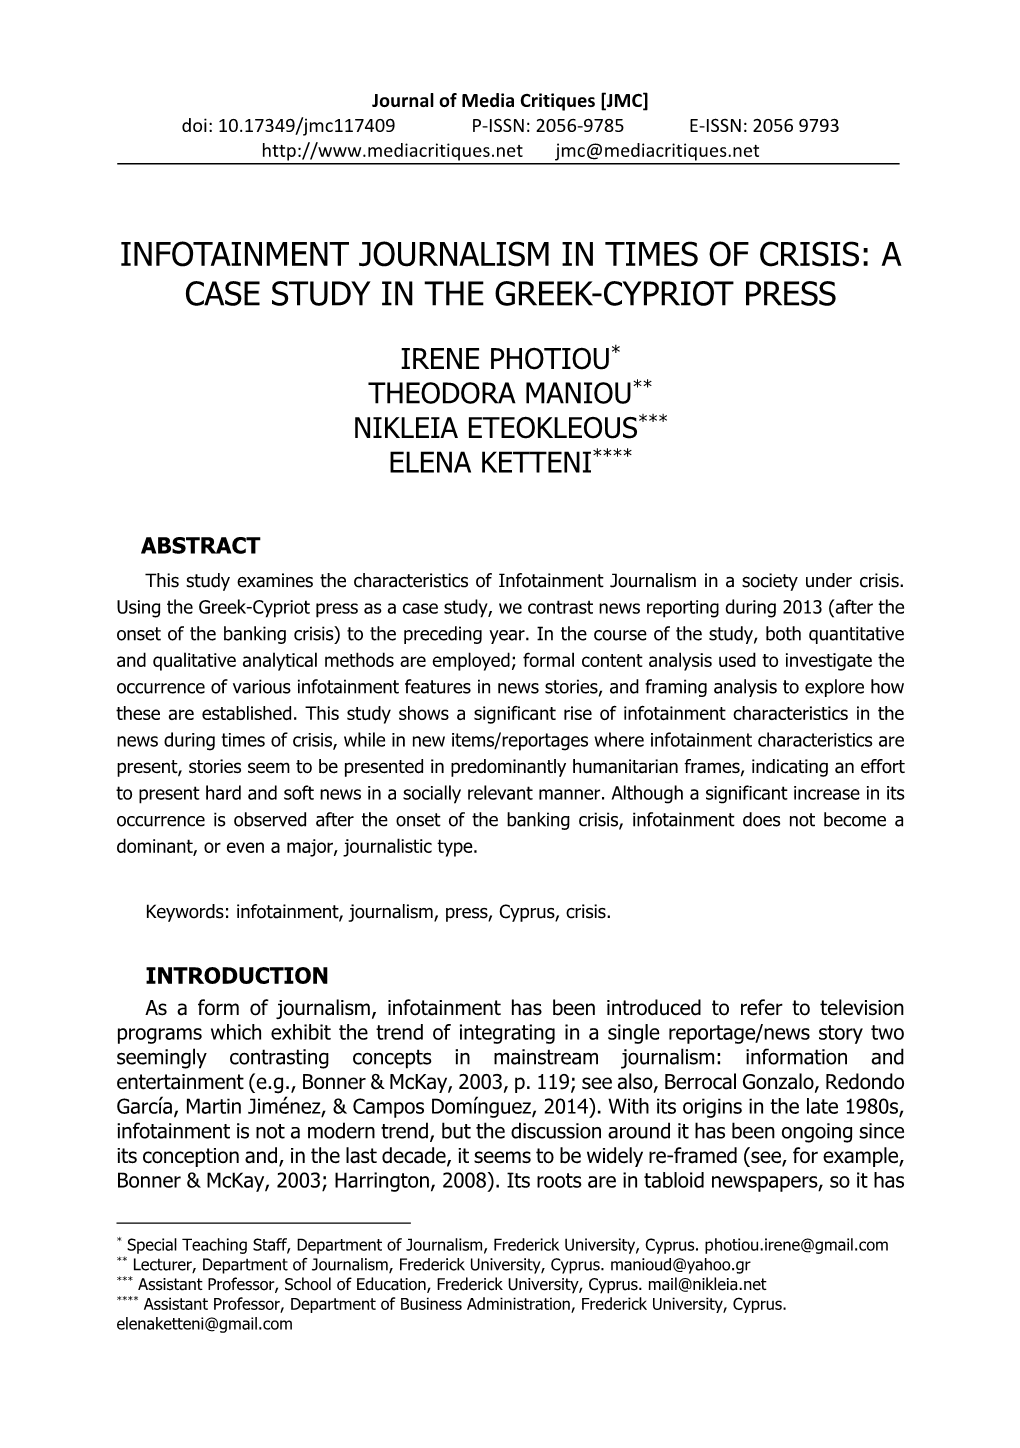 Infotainment Journalism in Times of Crisis: a Case Study in the Greek-Cypriot Press